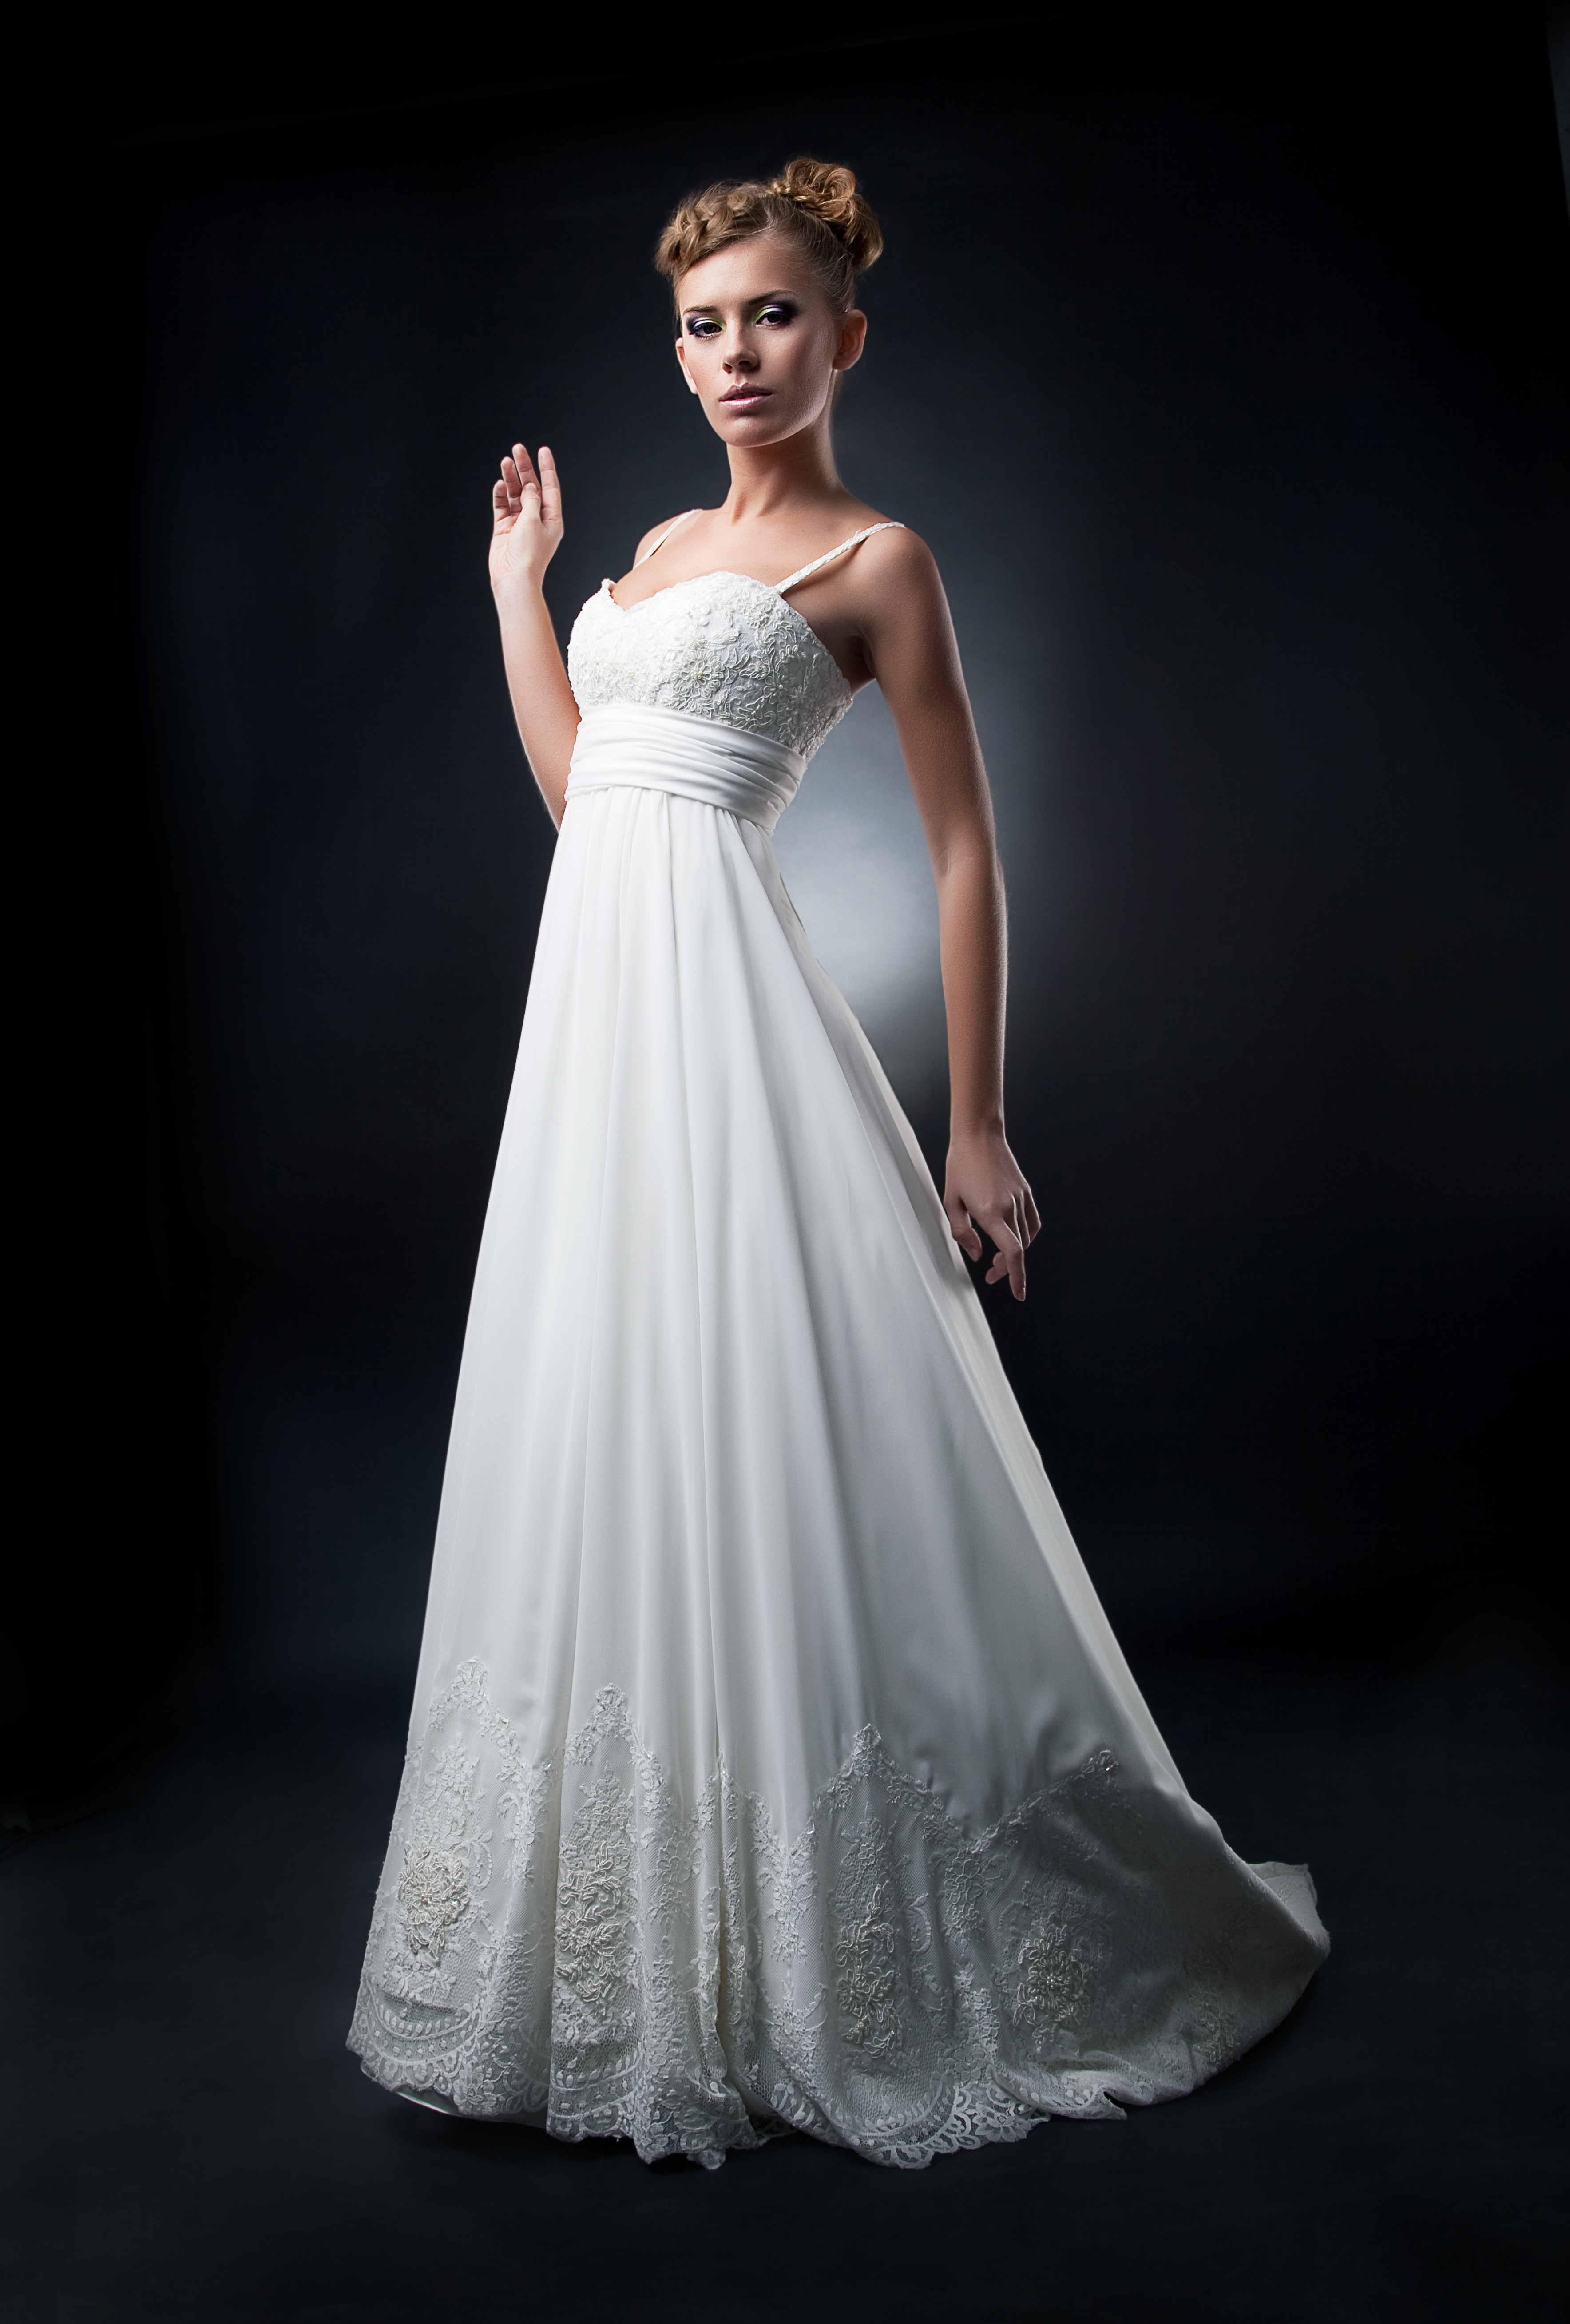 Empire Hochzeitskleid
 bridal gowns – Hair and Makeup Artistry